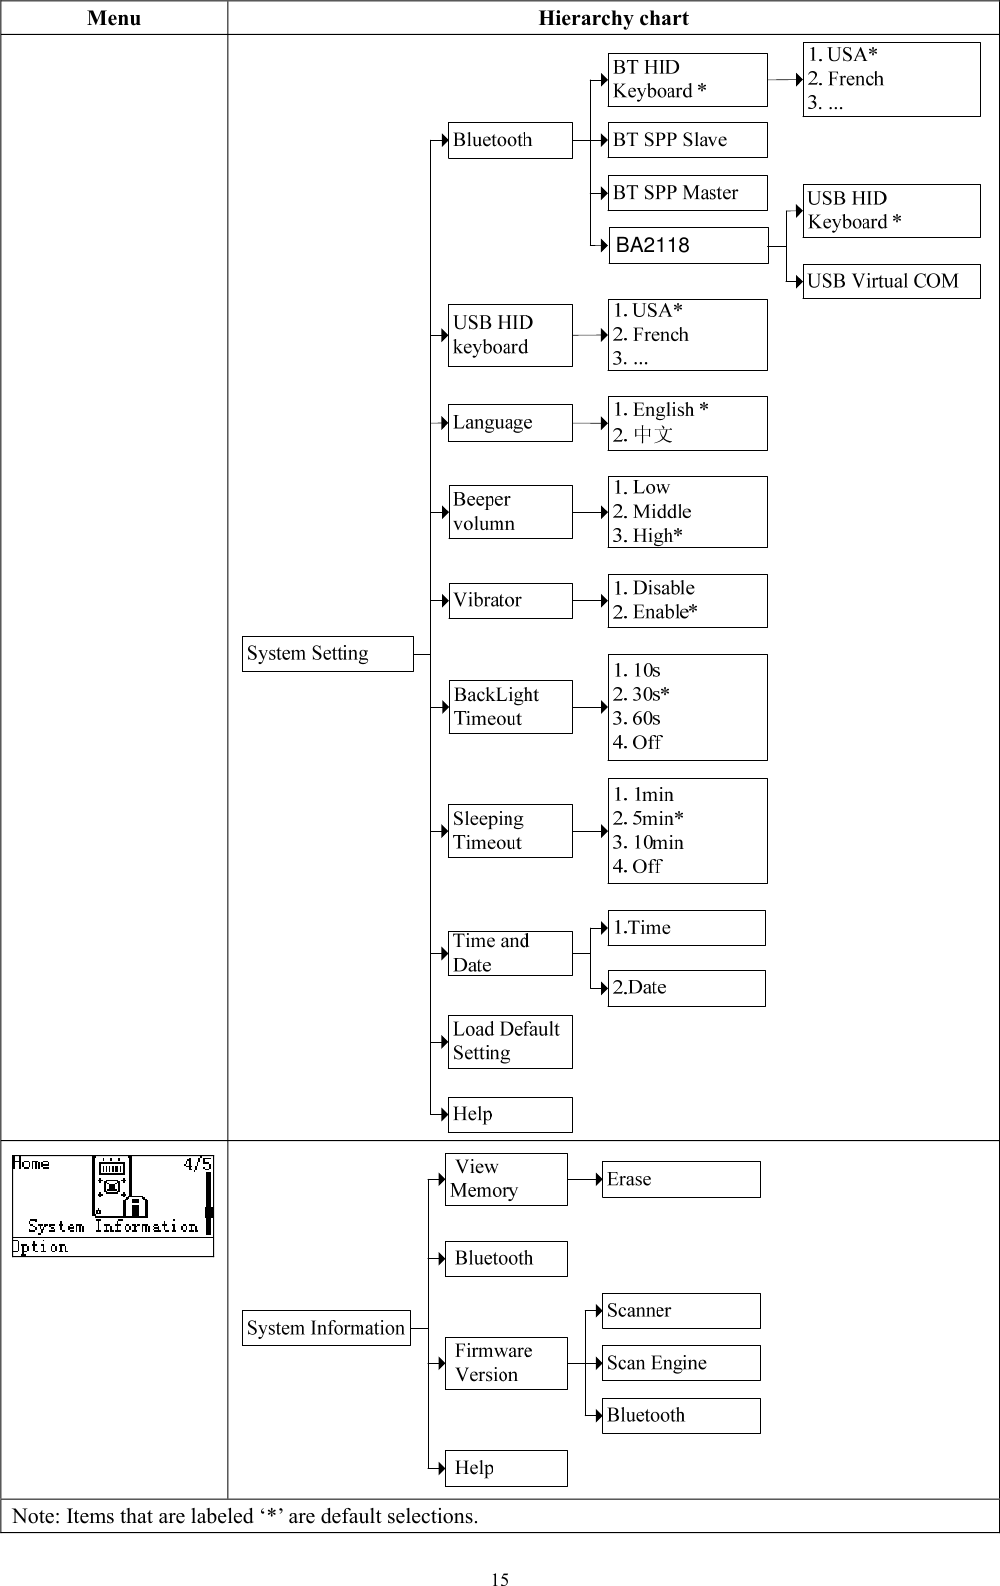  15 Menu  Hierarchy chart   Note: Items that are labeled ‘*’ are default selections. BA2118                                                                                           